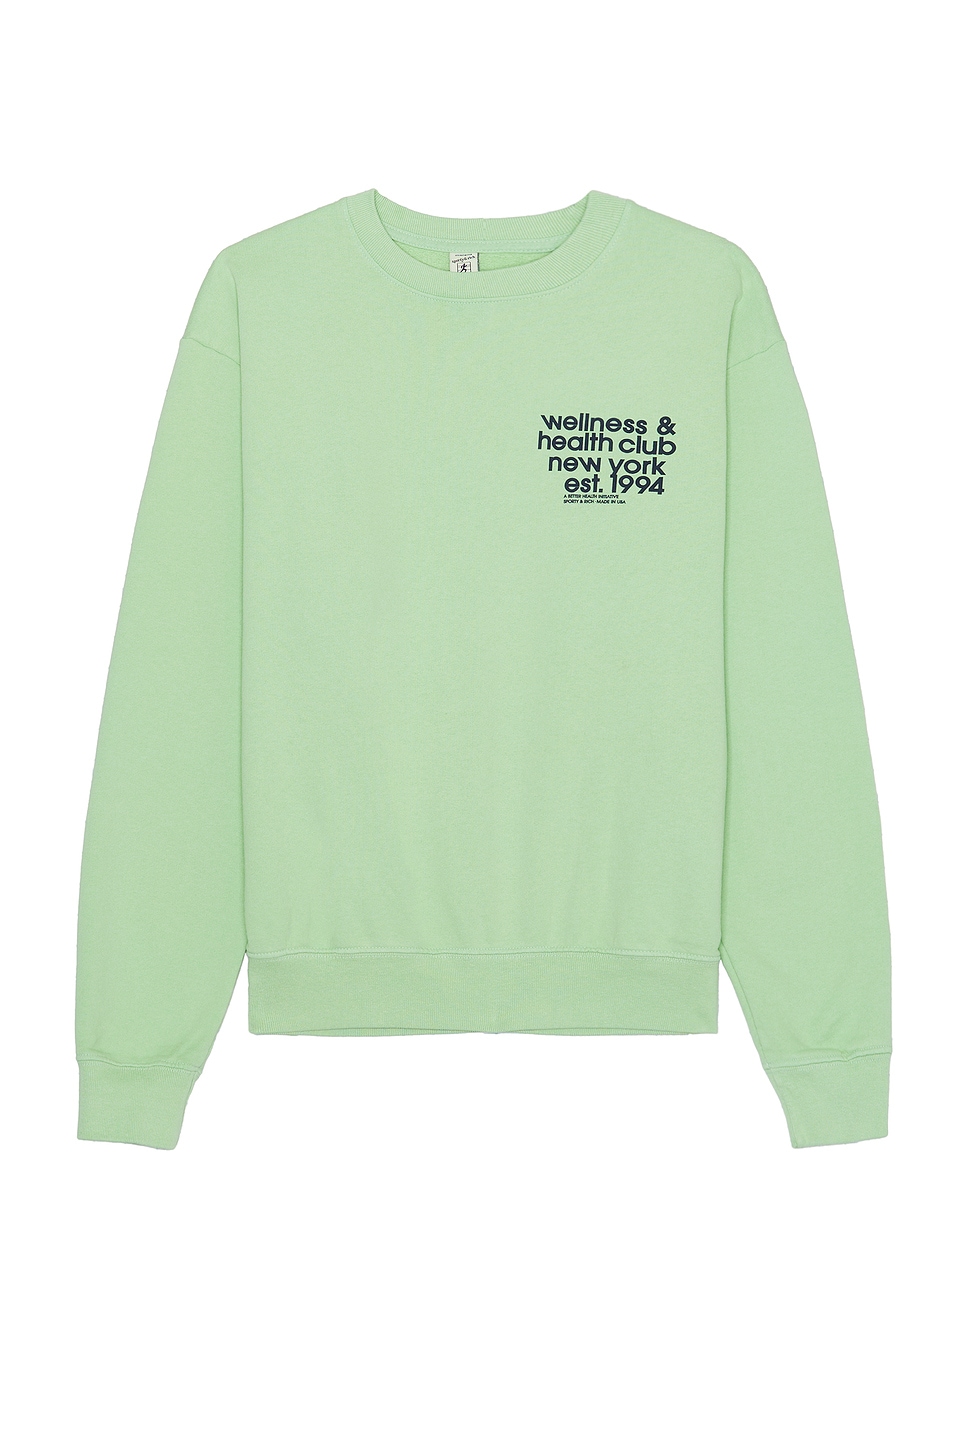 Image 1 of Sporty & Rich USA Health Club Crewneck in Thyme